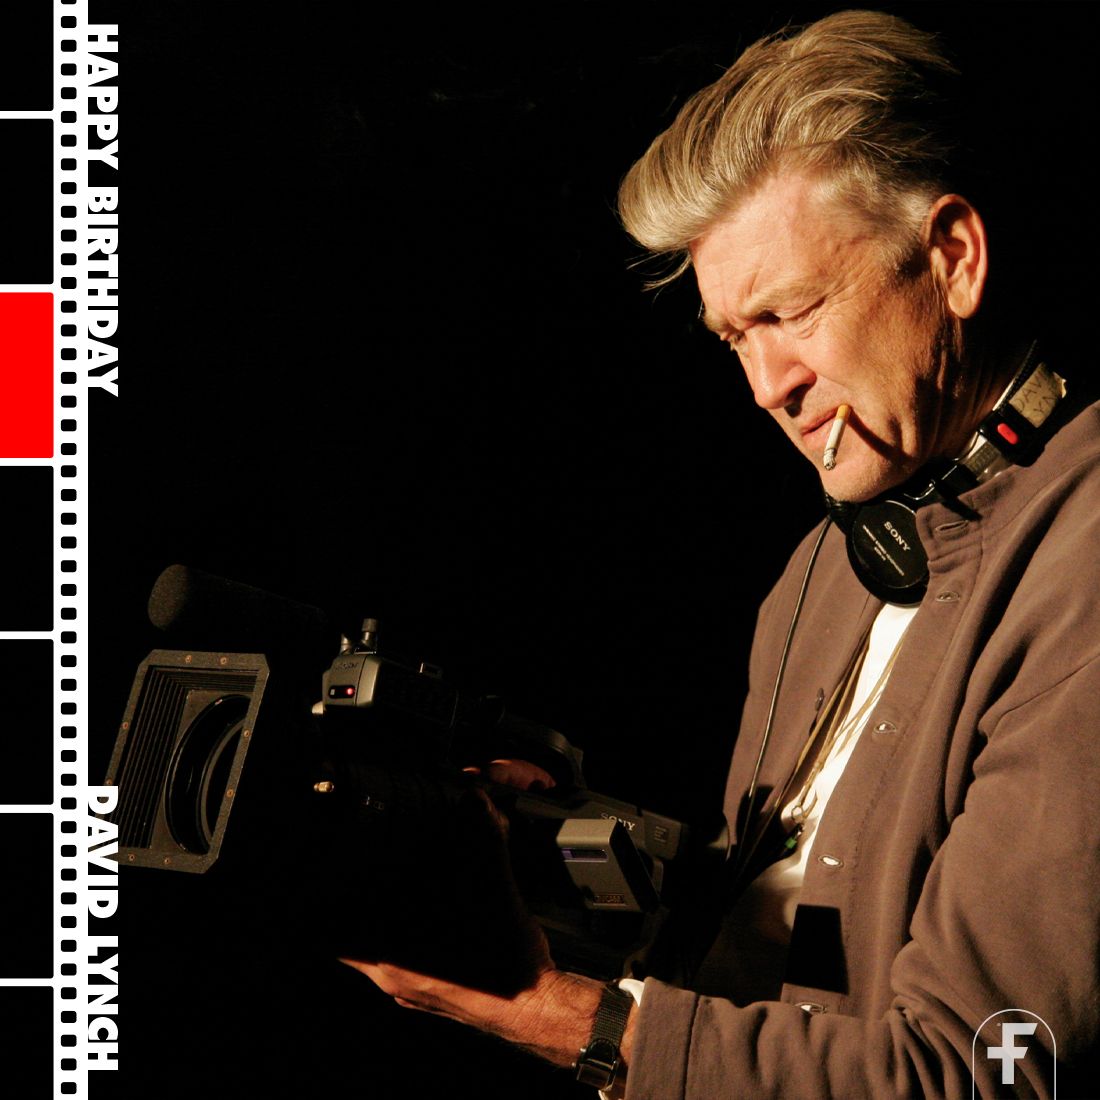 Wishing the happiest of birthdays to the one and only David Lynch.